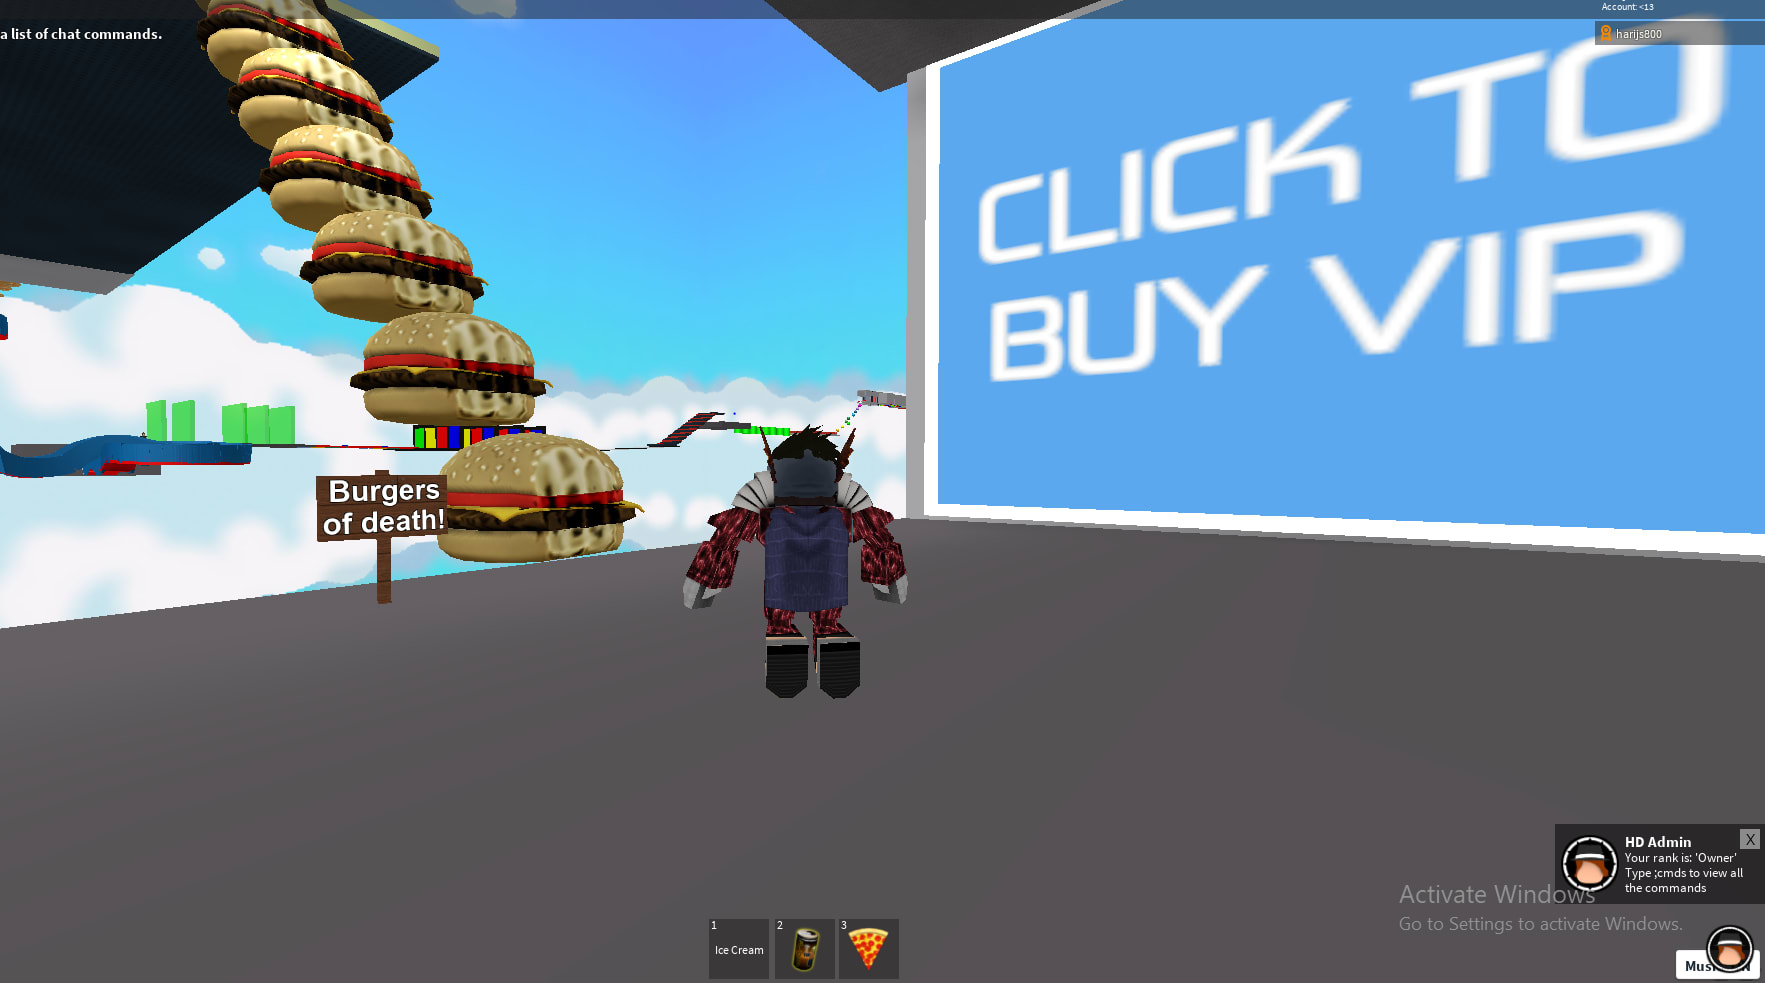 Make A Roblox Obby By Harijsbermaks - roblox obby video ad